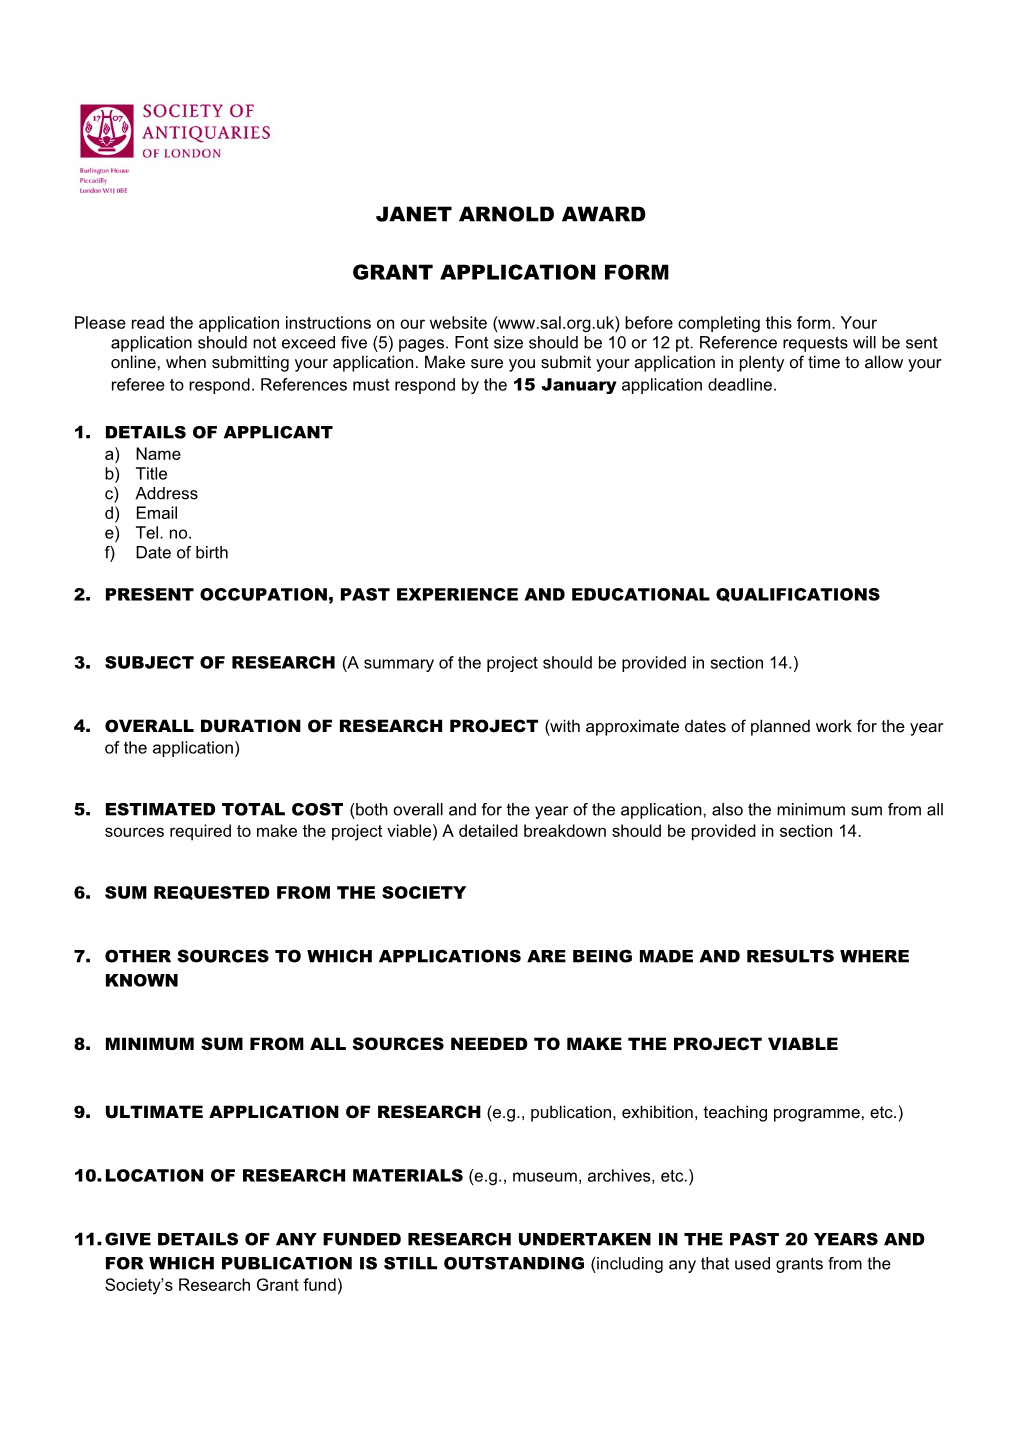 Grant Application Form s4